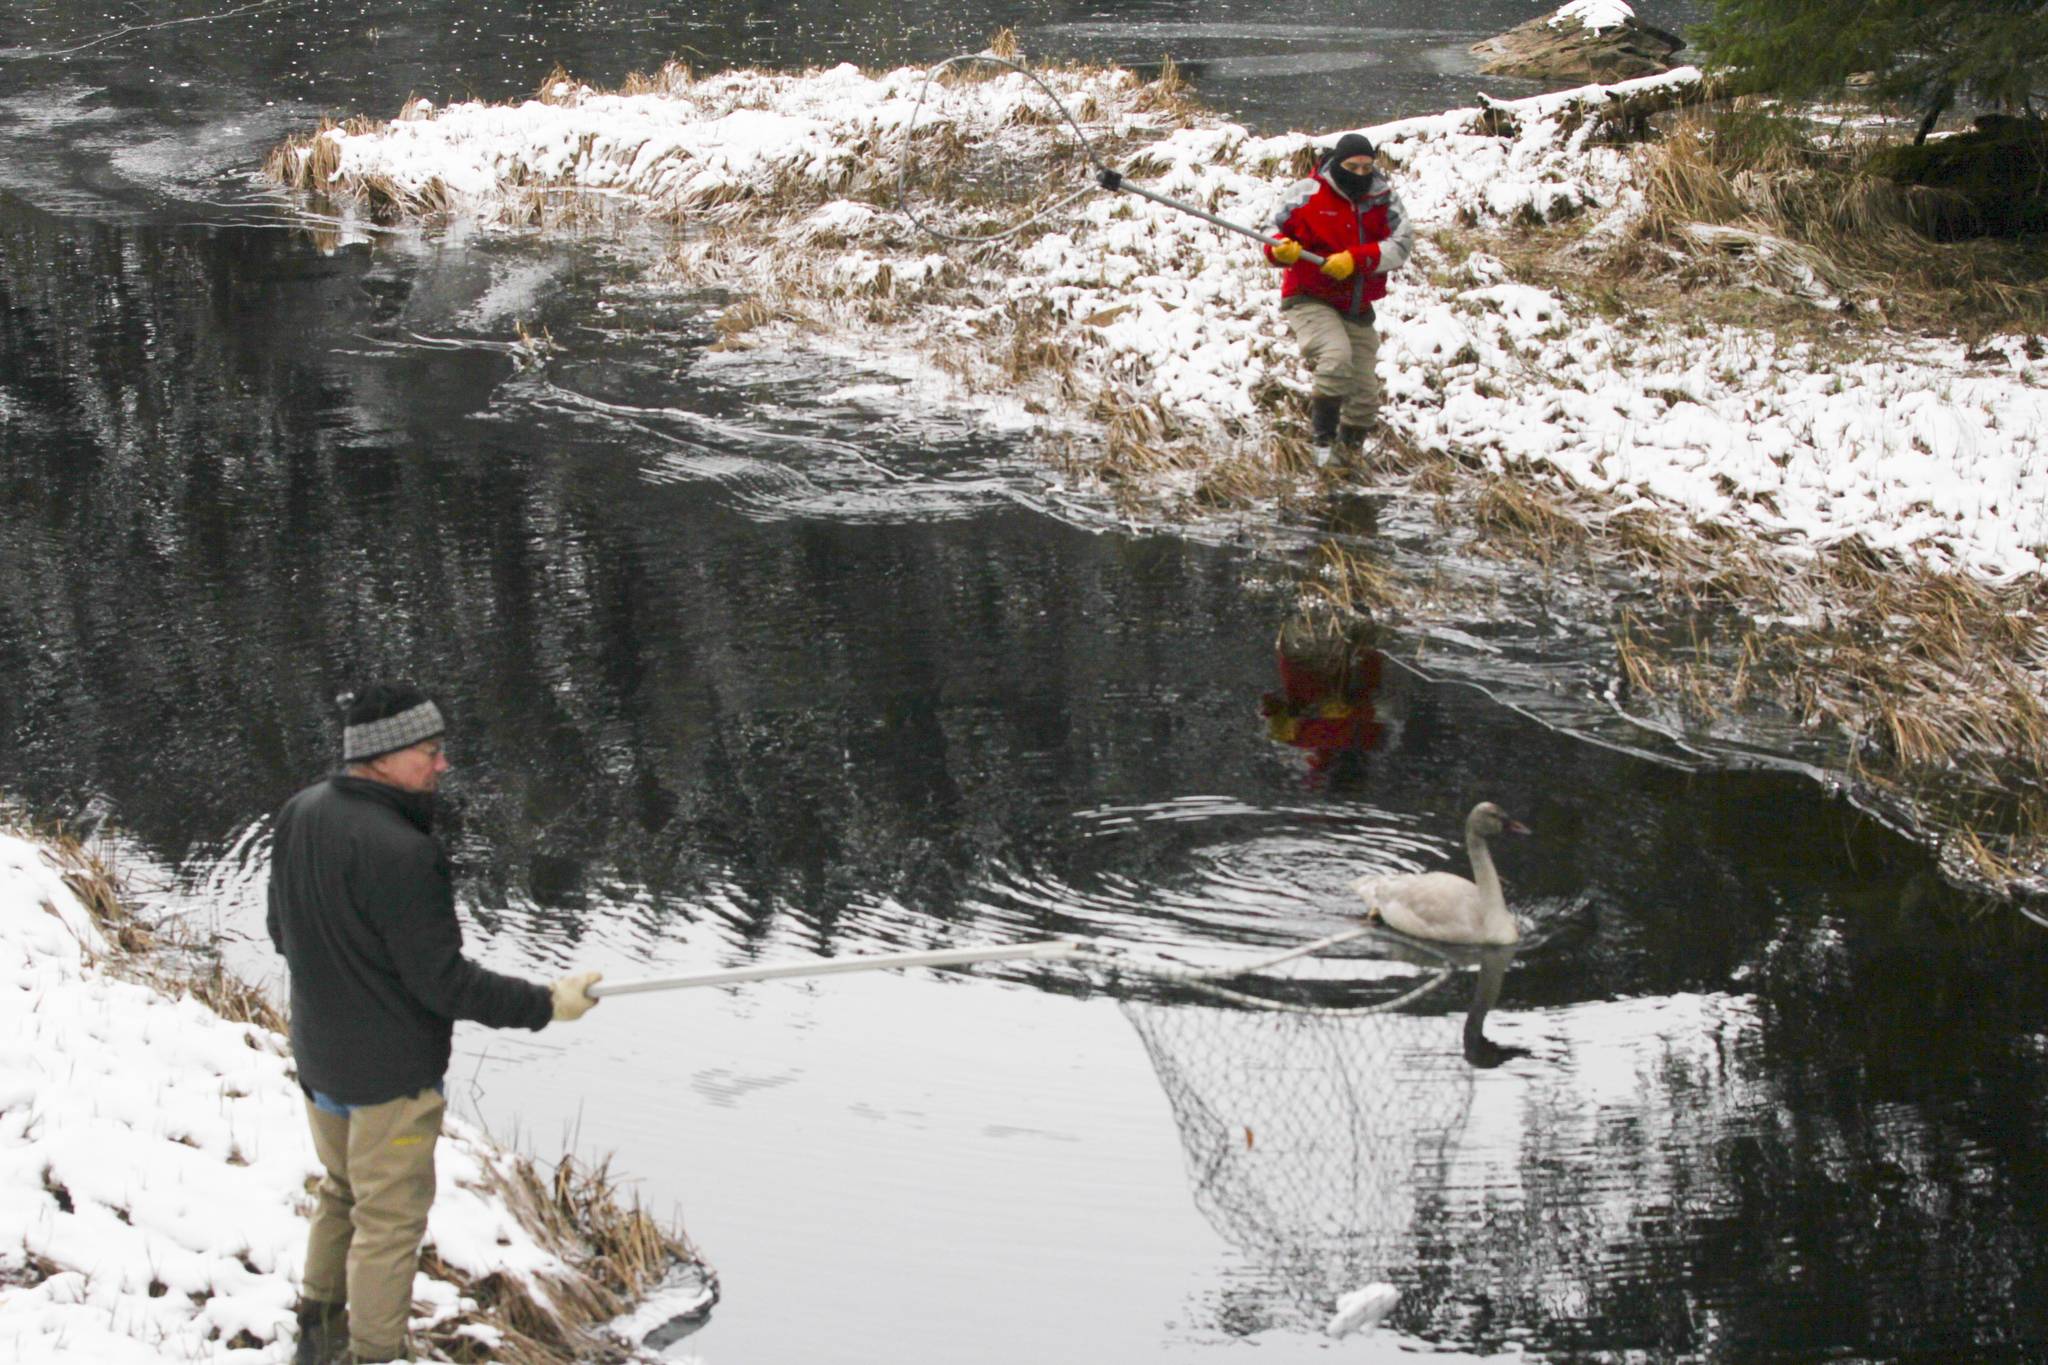 Tim Benner, right and Michael Murphy, left, assist the Juneau Raptor Center as volunteers attempted to capture a trumpeter swan with an injured wing at Auke Lake on Jan. 28, 2021. (Michael S. Lockett / Juneau Empire)